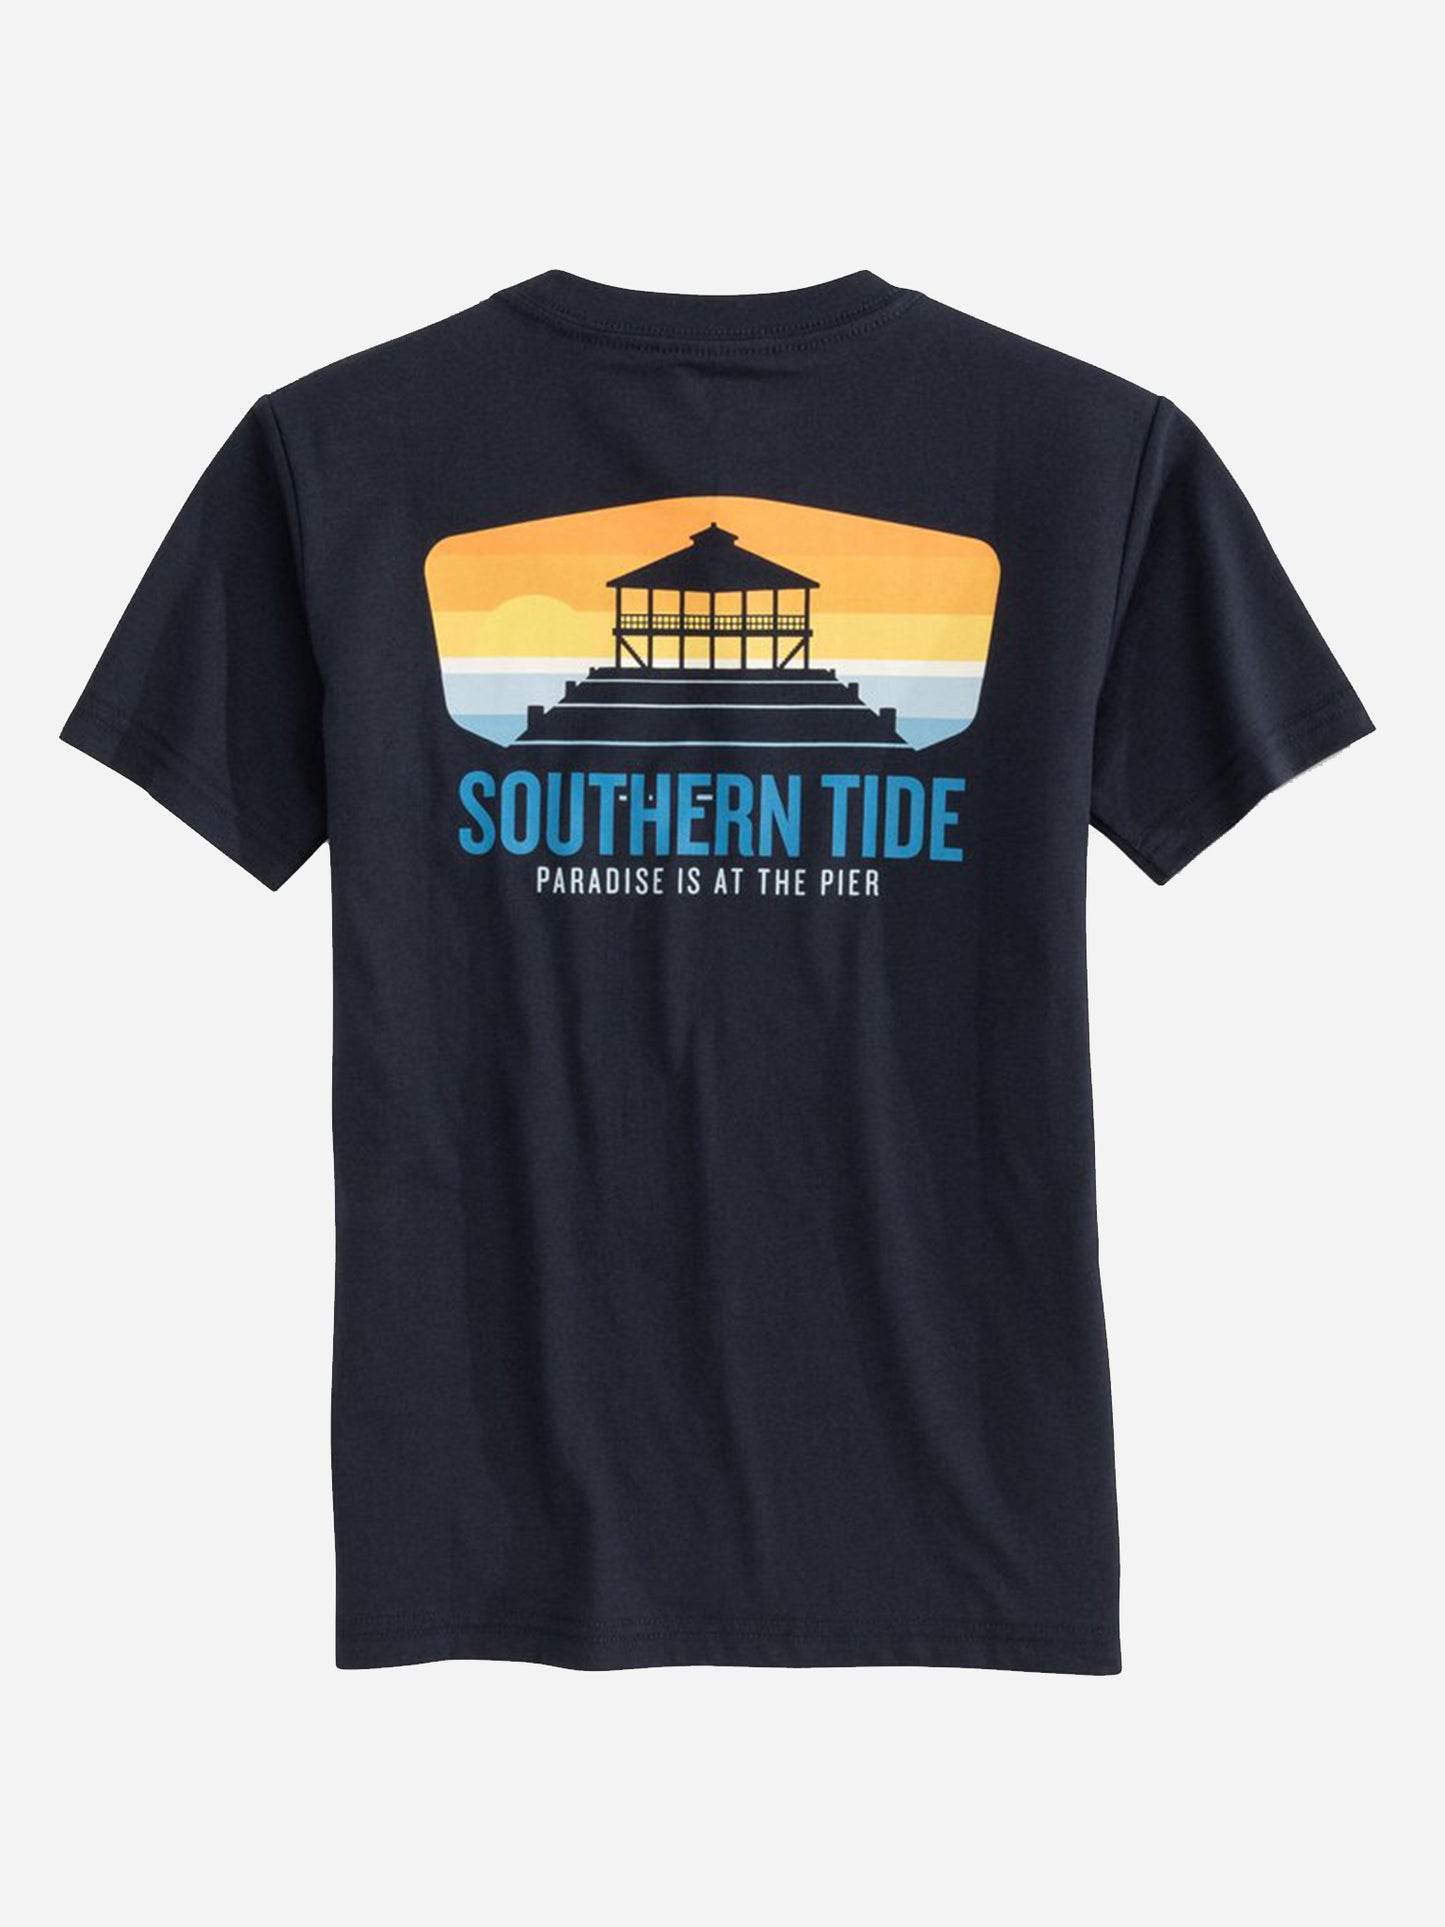 Southern Tide Boys' Paradise Is The Pier T-Shirt